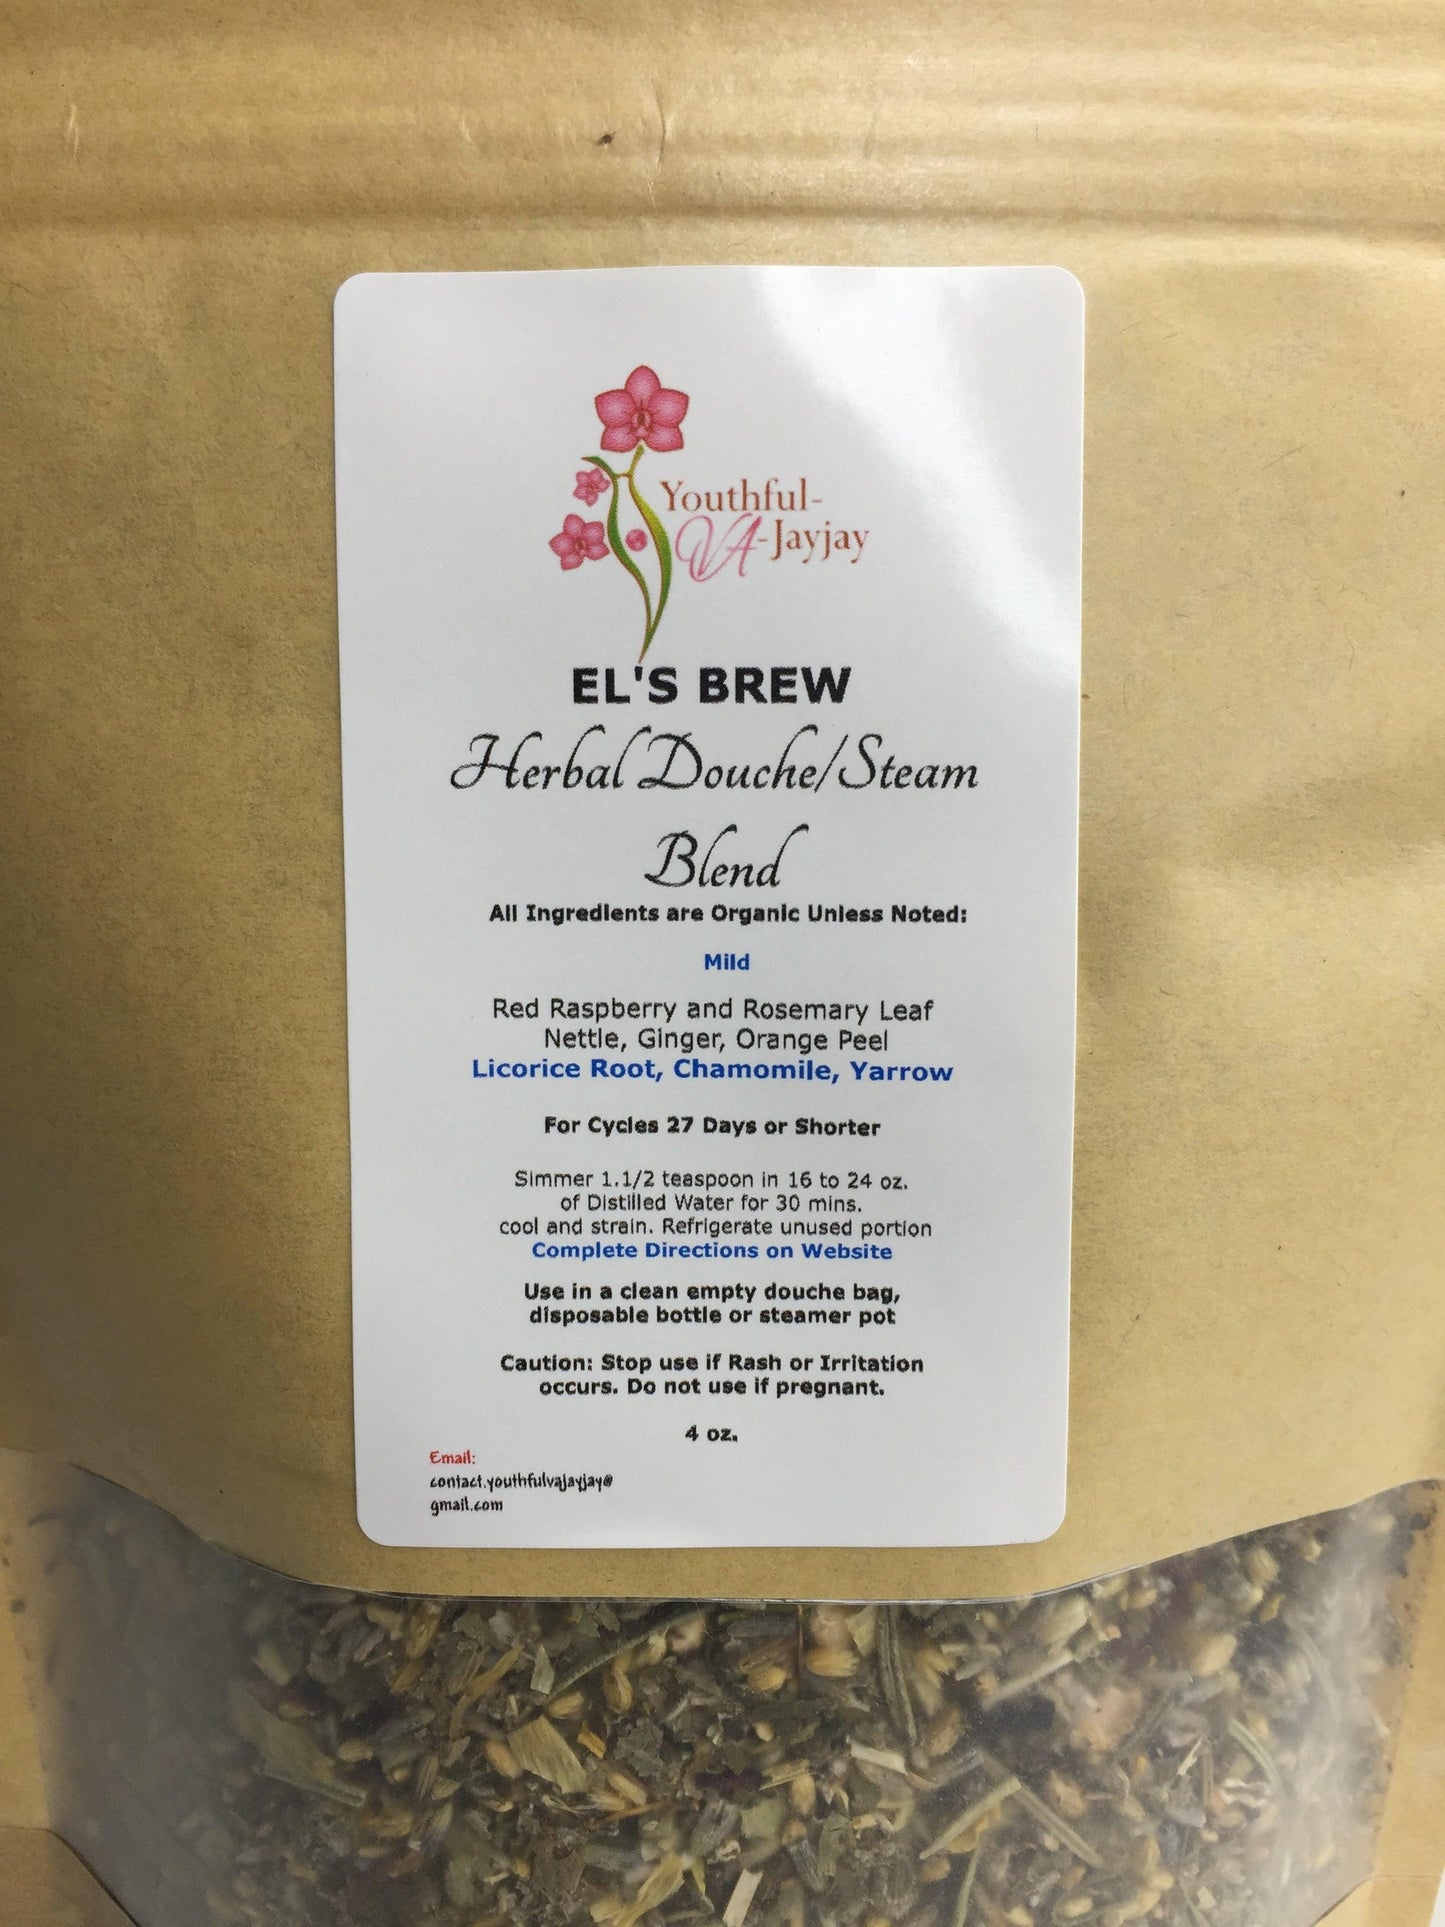 EL'S BREW- Organic Herbal Steam/Douche Blend, Handcrafted MILD USE, 4oz. - Image #2